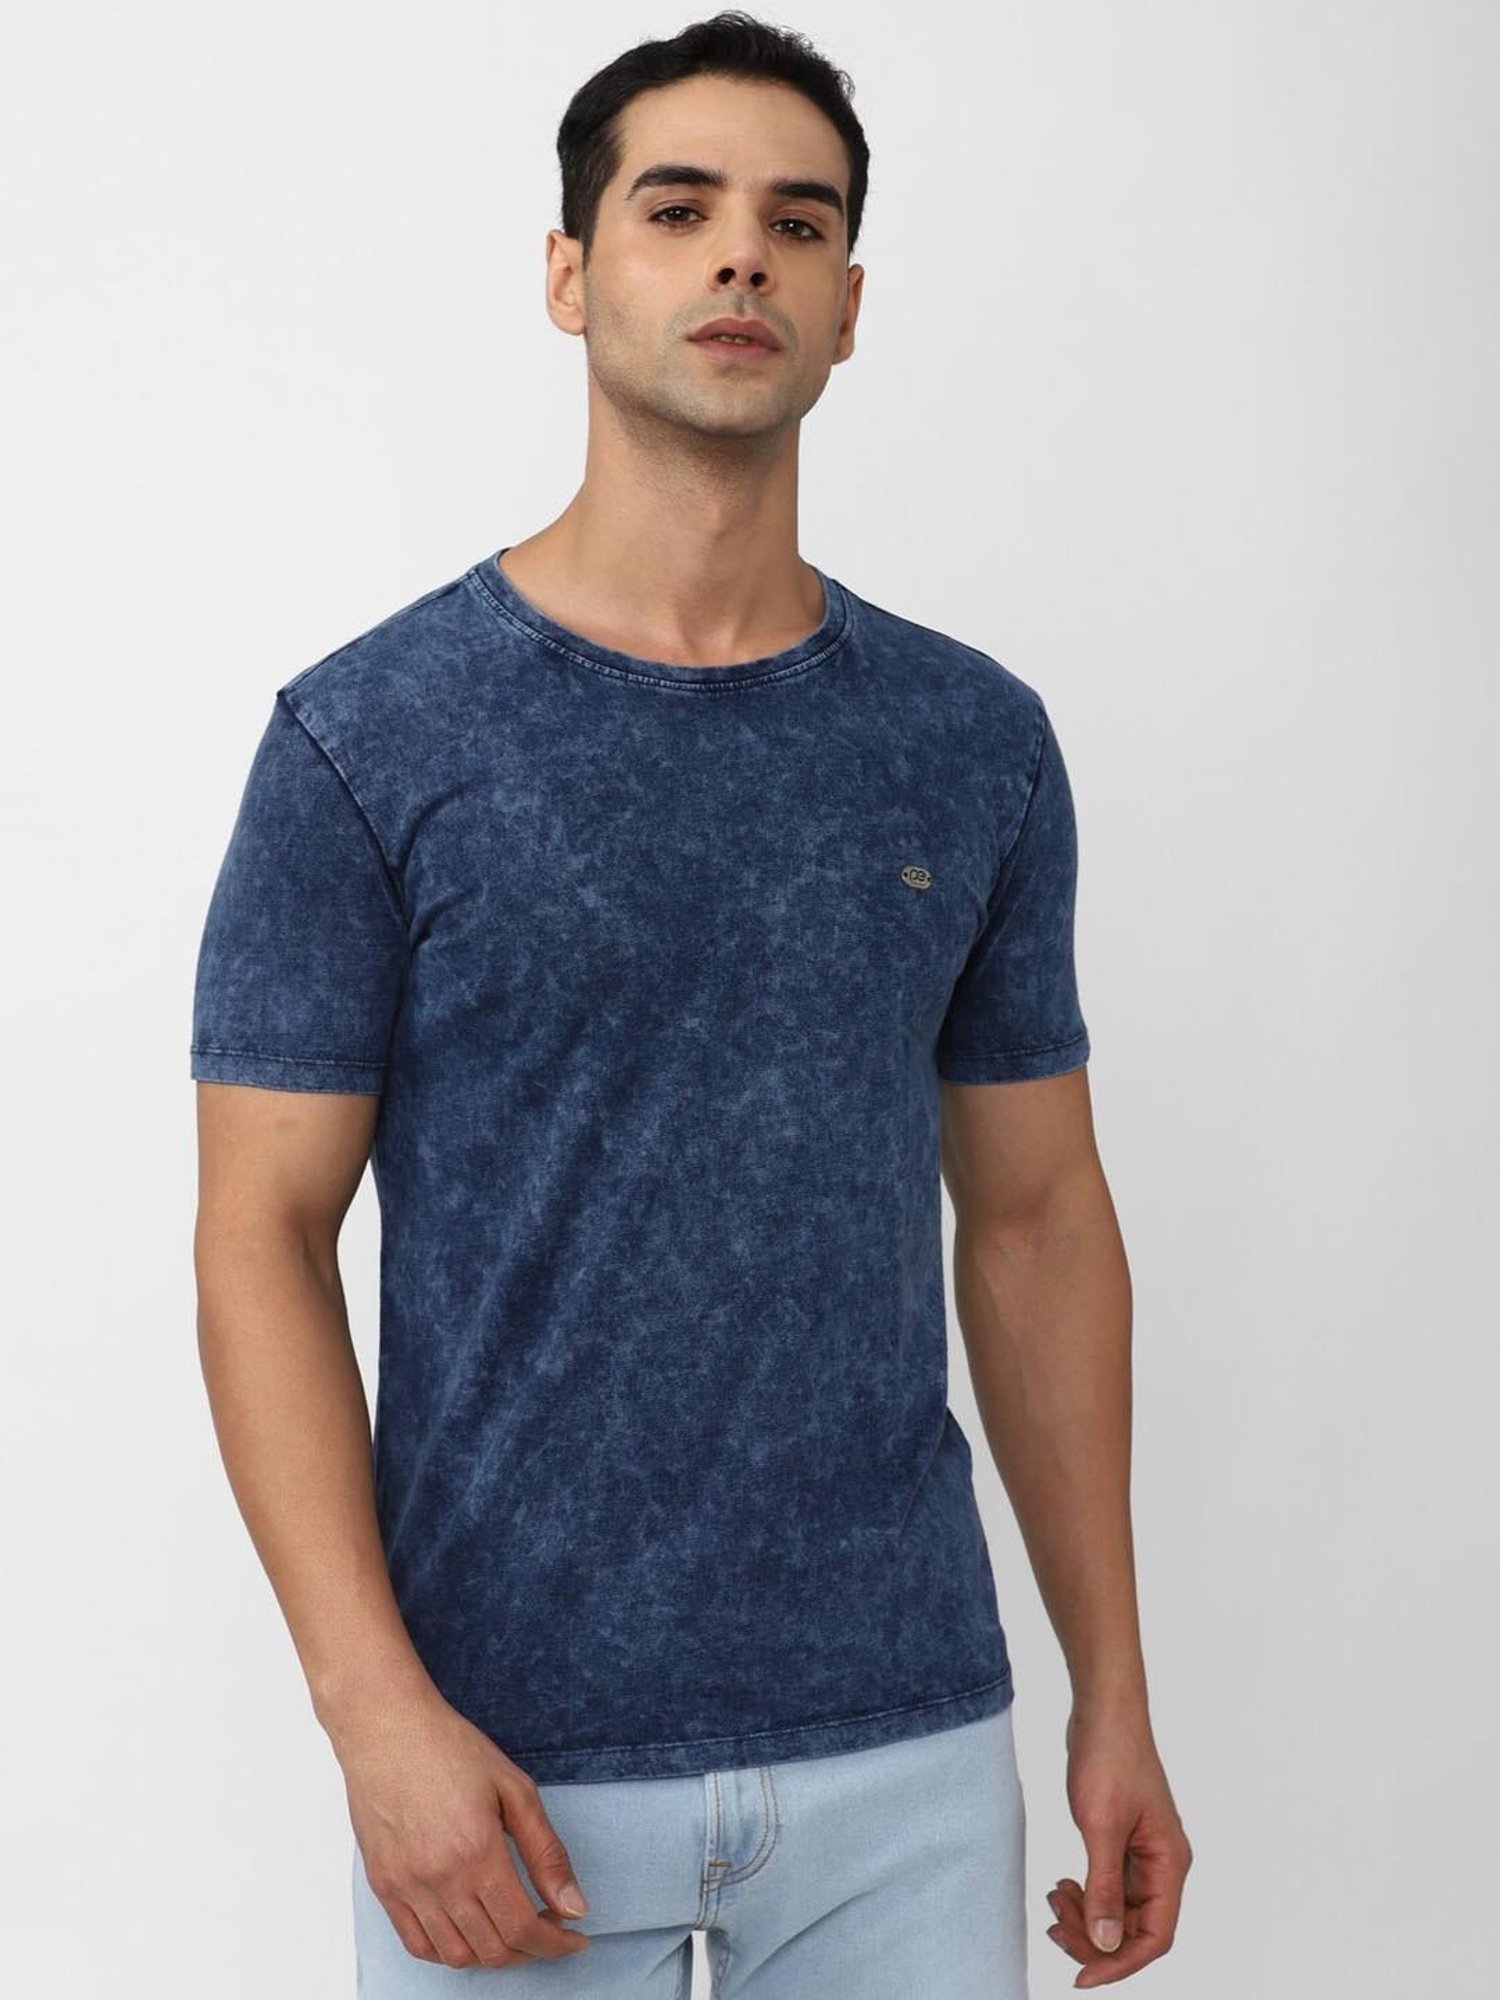 Which color t-shirt can I wear with blue jeans? - Quora